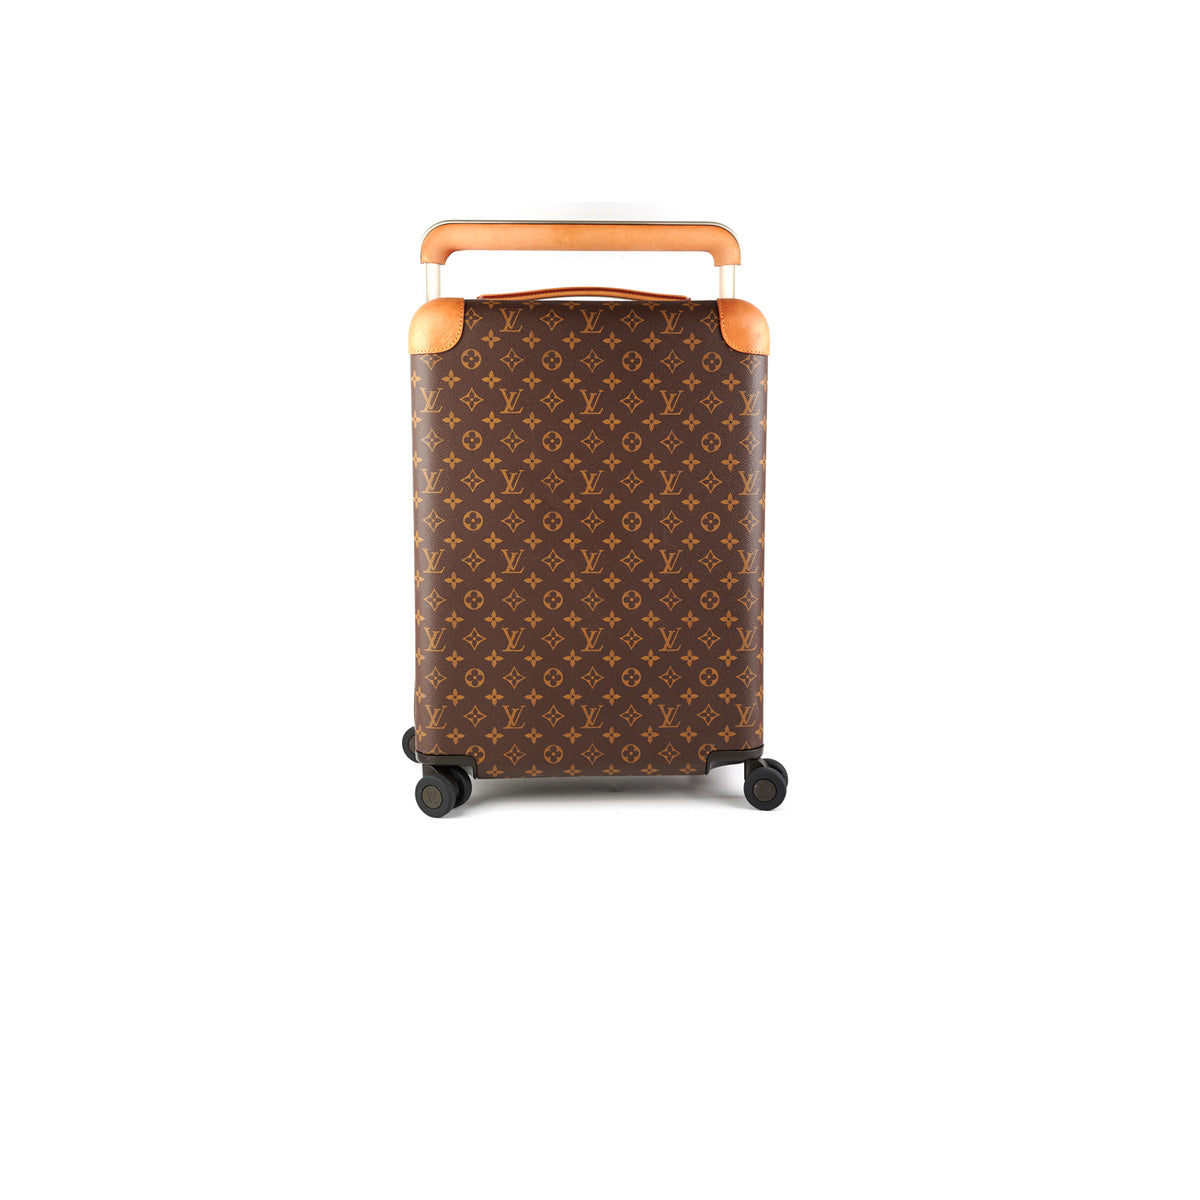 LOUIS VUITTON SUITCASE Horizon 50 Used Comes With Bag $1,750.00